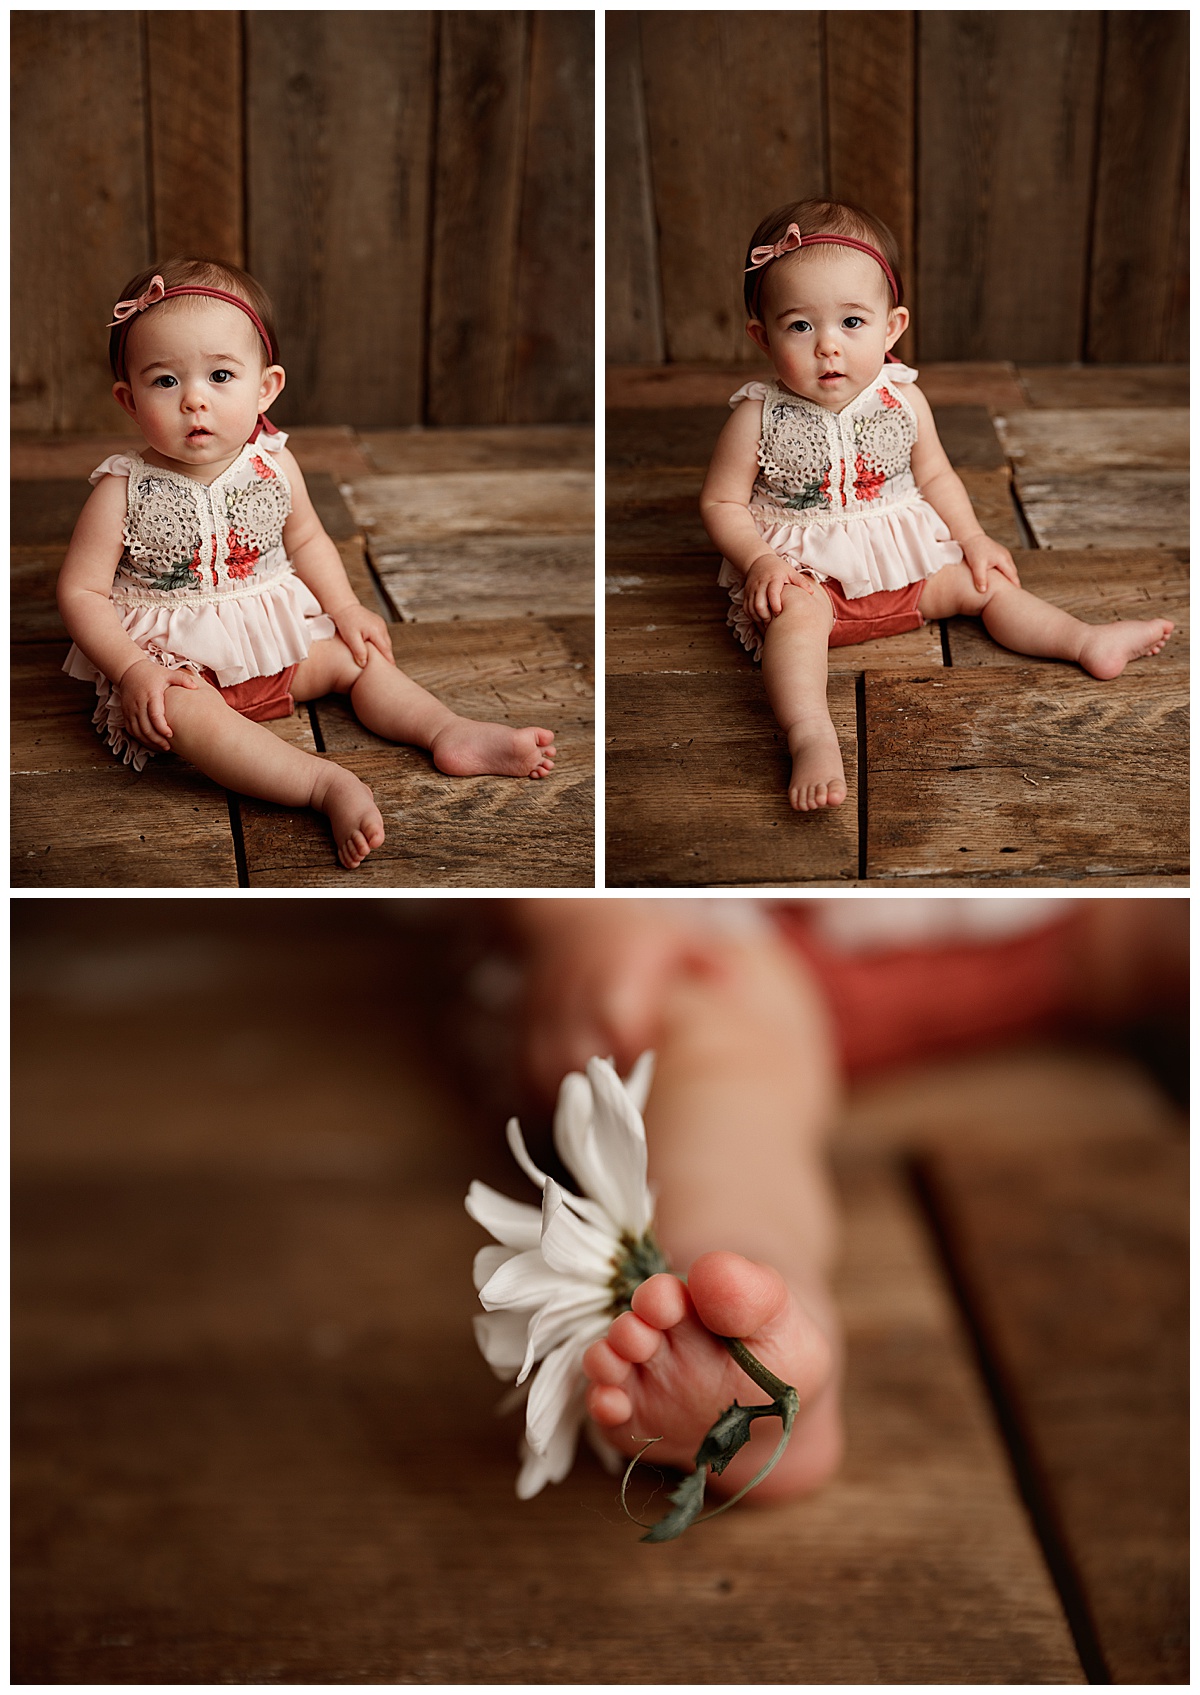 Flower outfit and flower in toe by Norma Fayak Photography